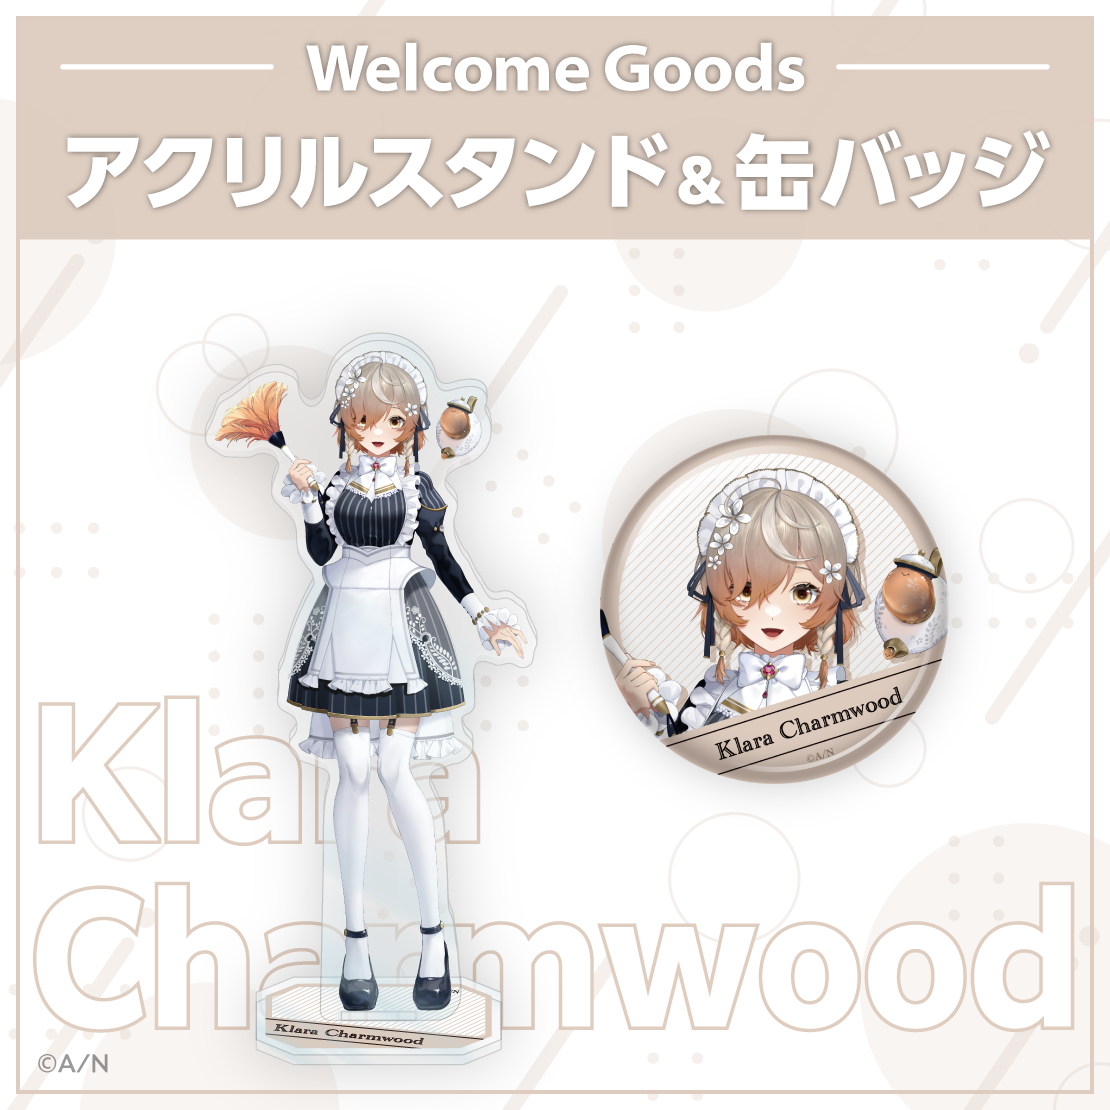 【Welcome Goods】クララ チャームウッド